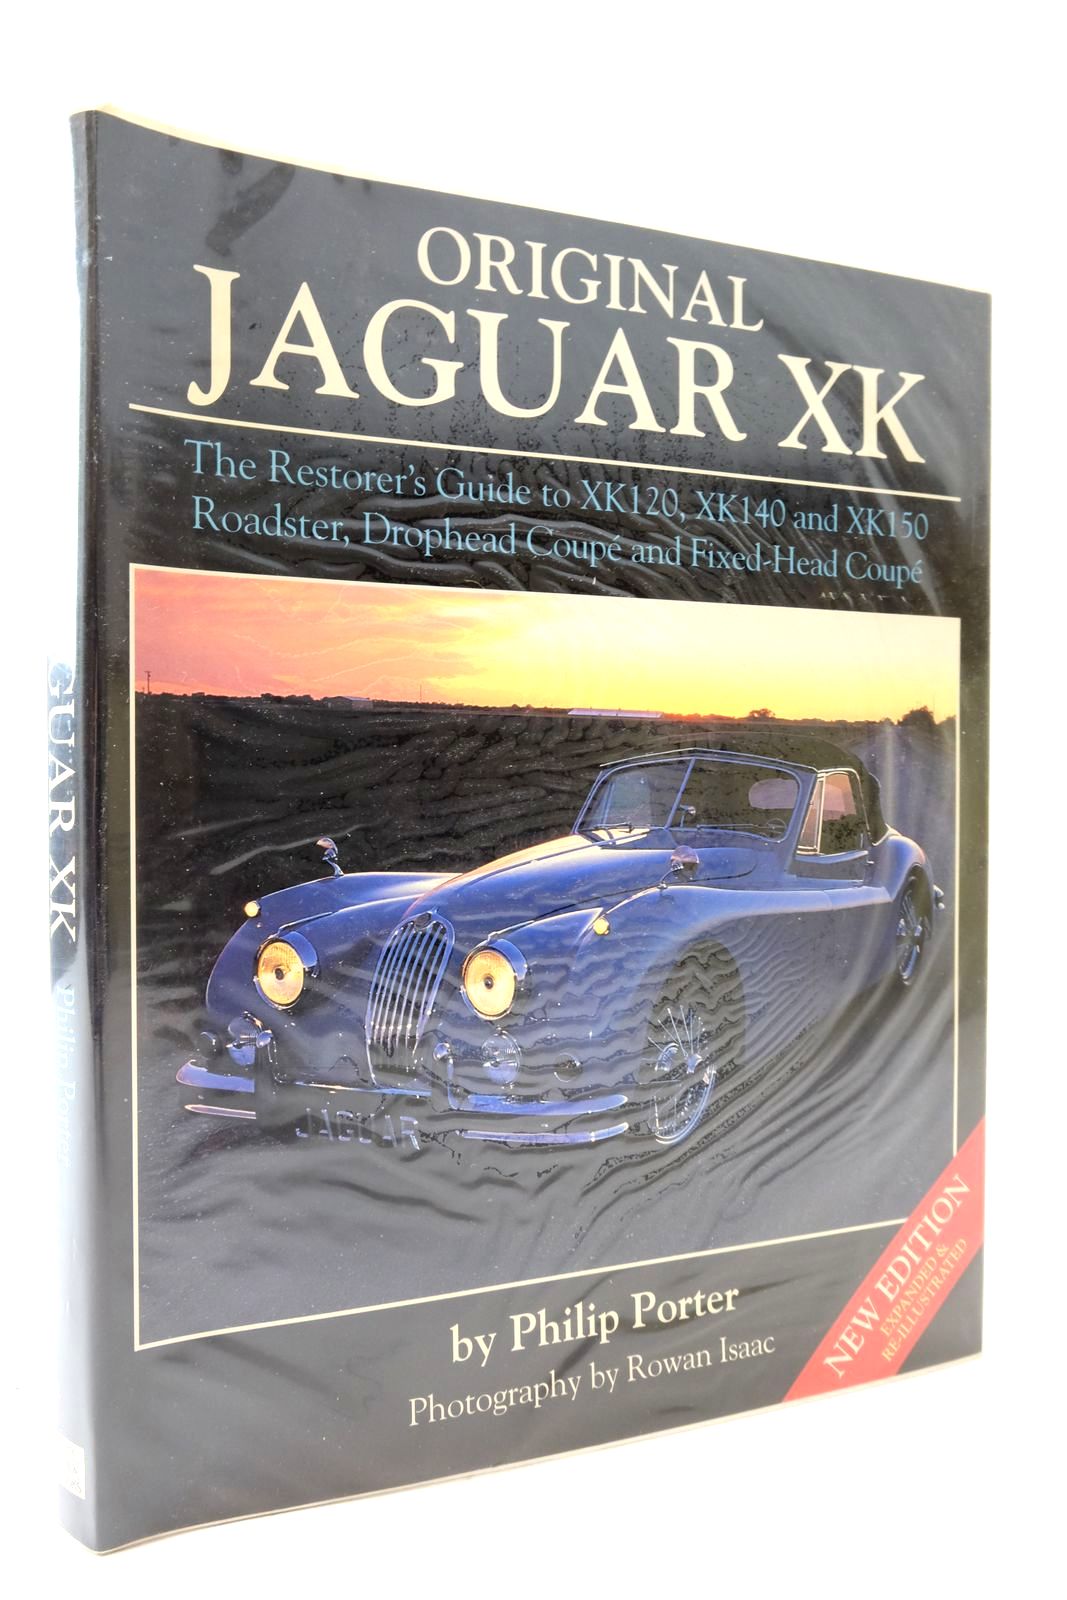 Photo of ORIGINAL JAGUAR XK written by Porter, Philip published by Bay View Books (STOCK CODE: 2137995)  for sale by Stella & Rose's Books